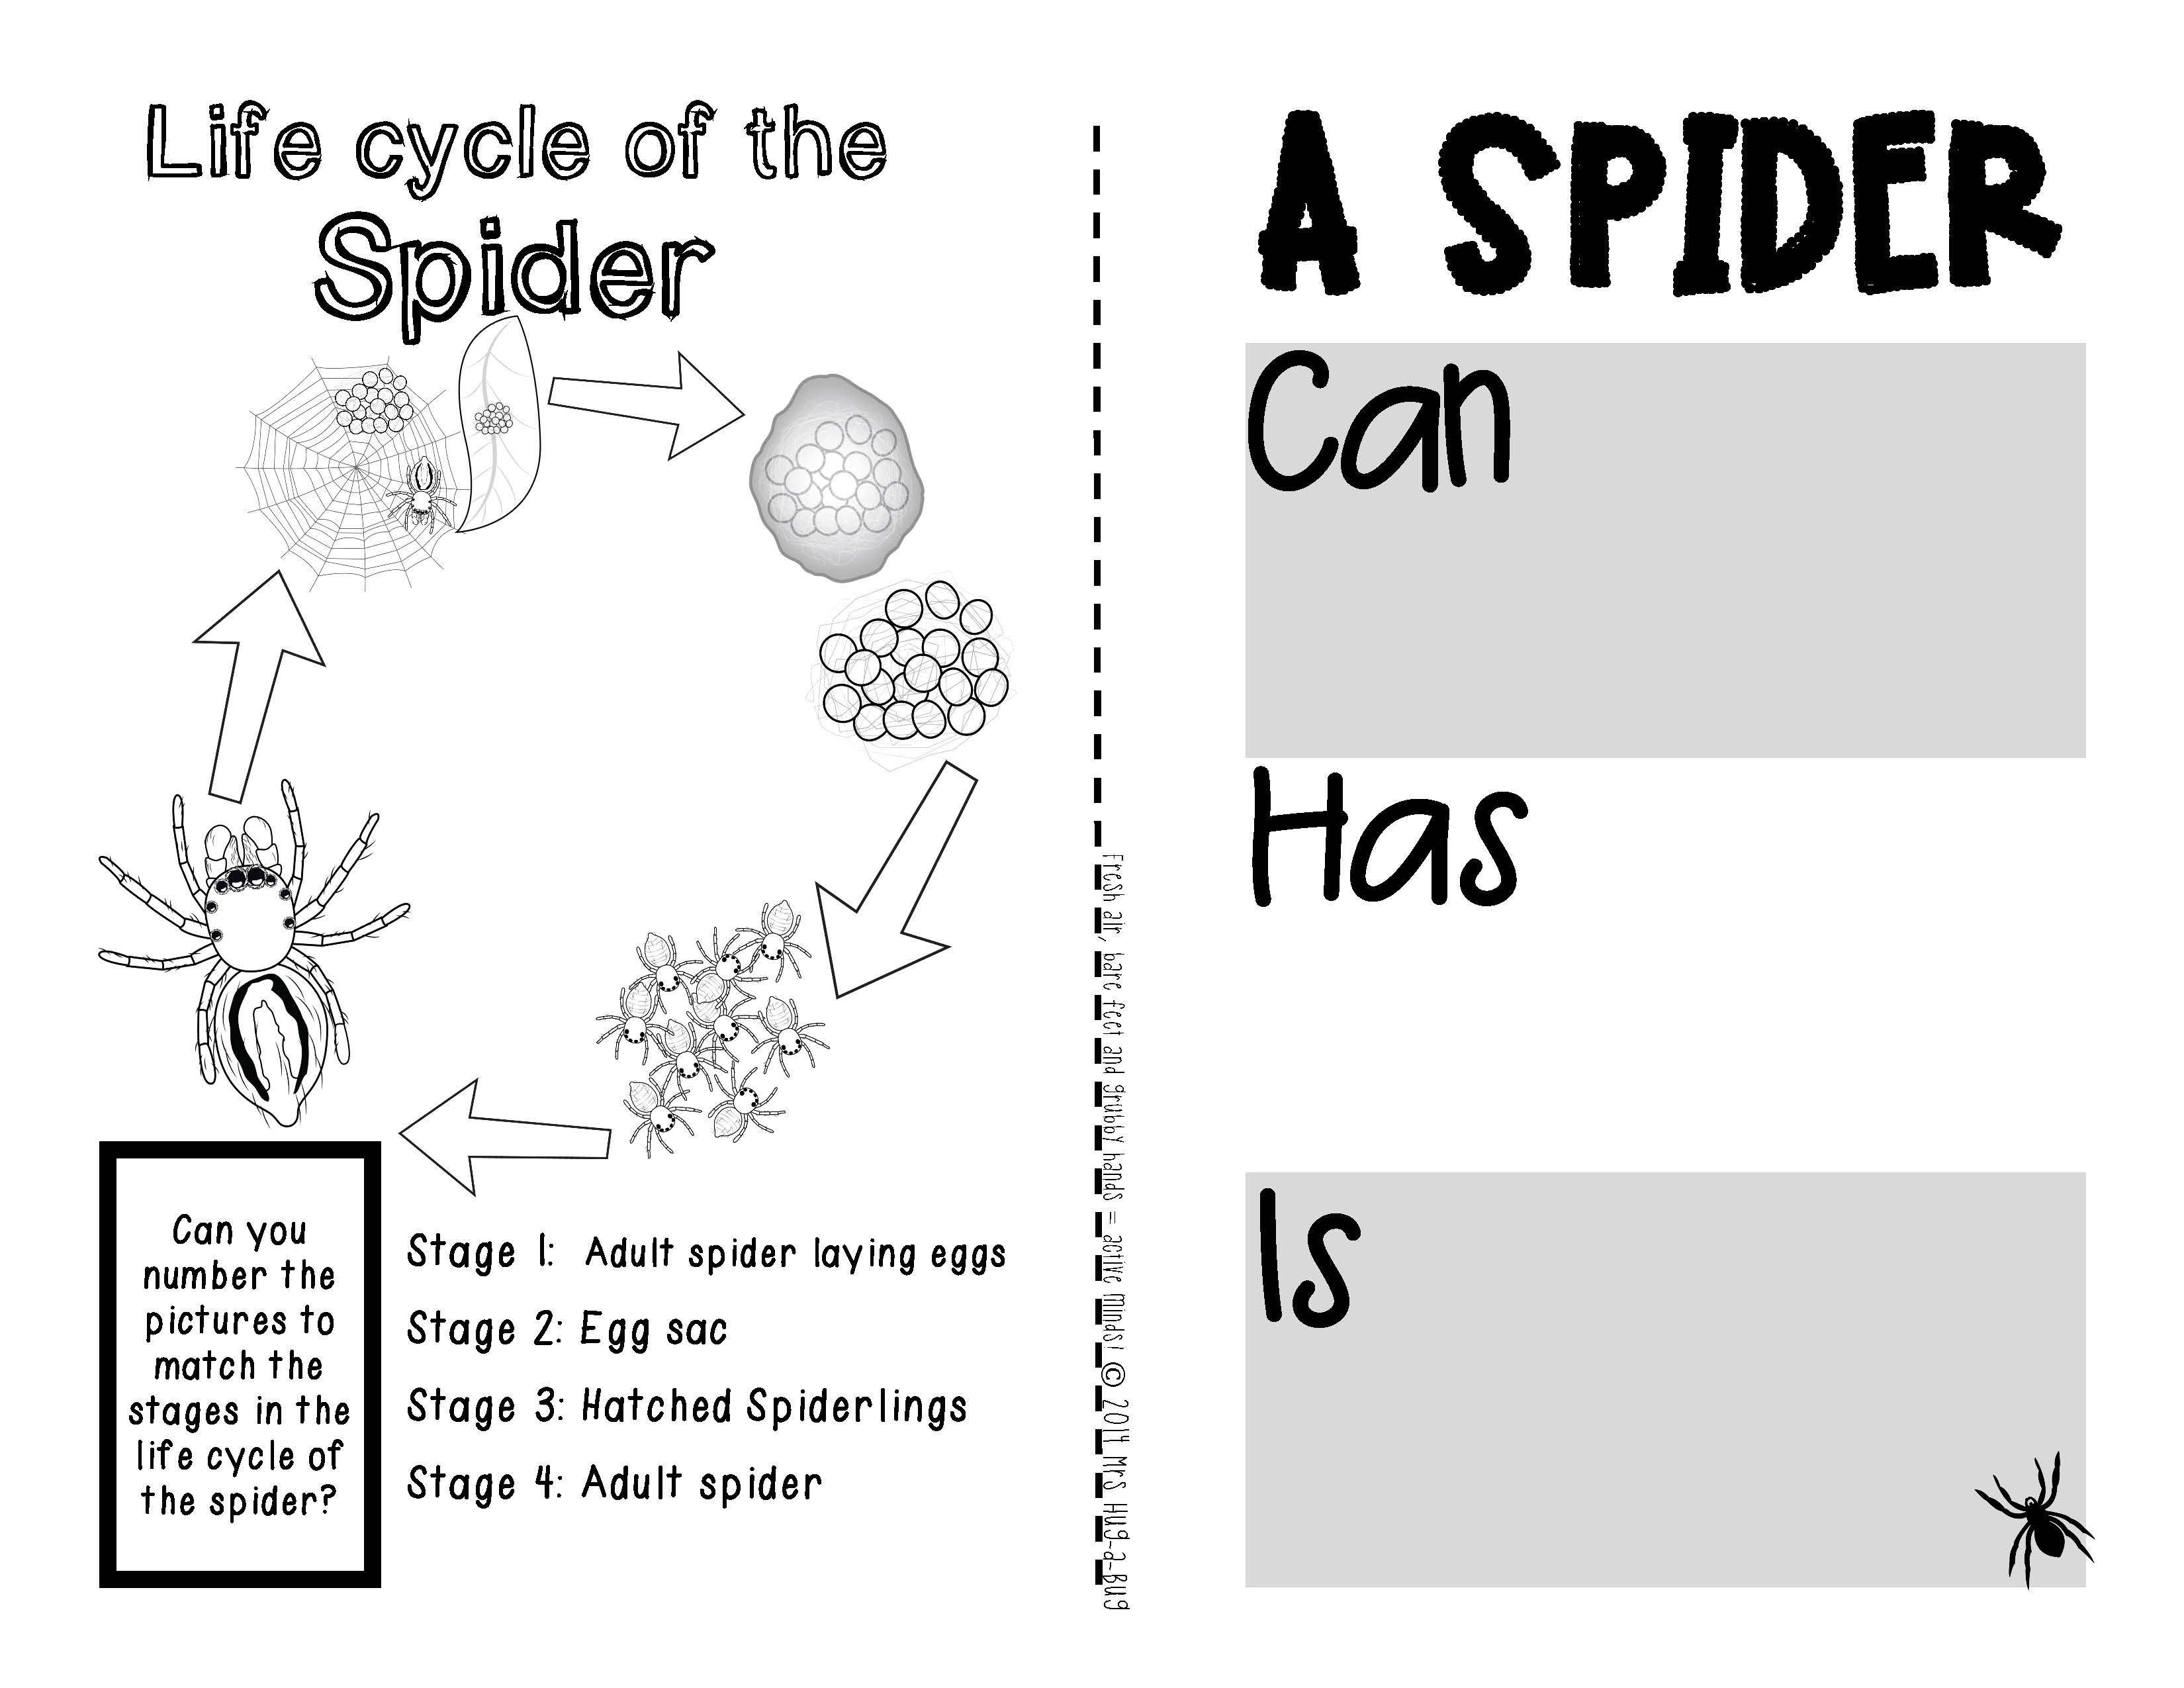 Spiders! {A booklet of activities celebrating the spider’s life cycle}